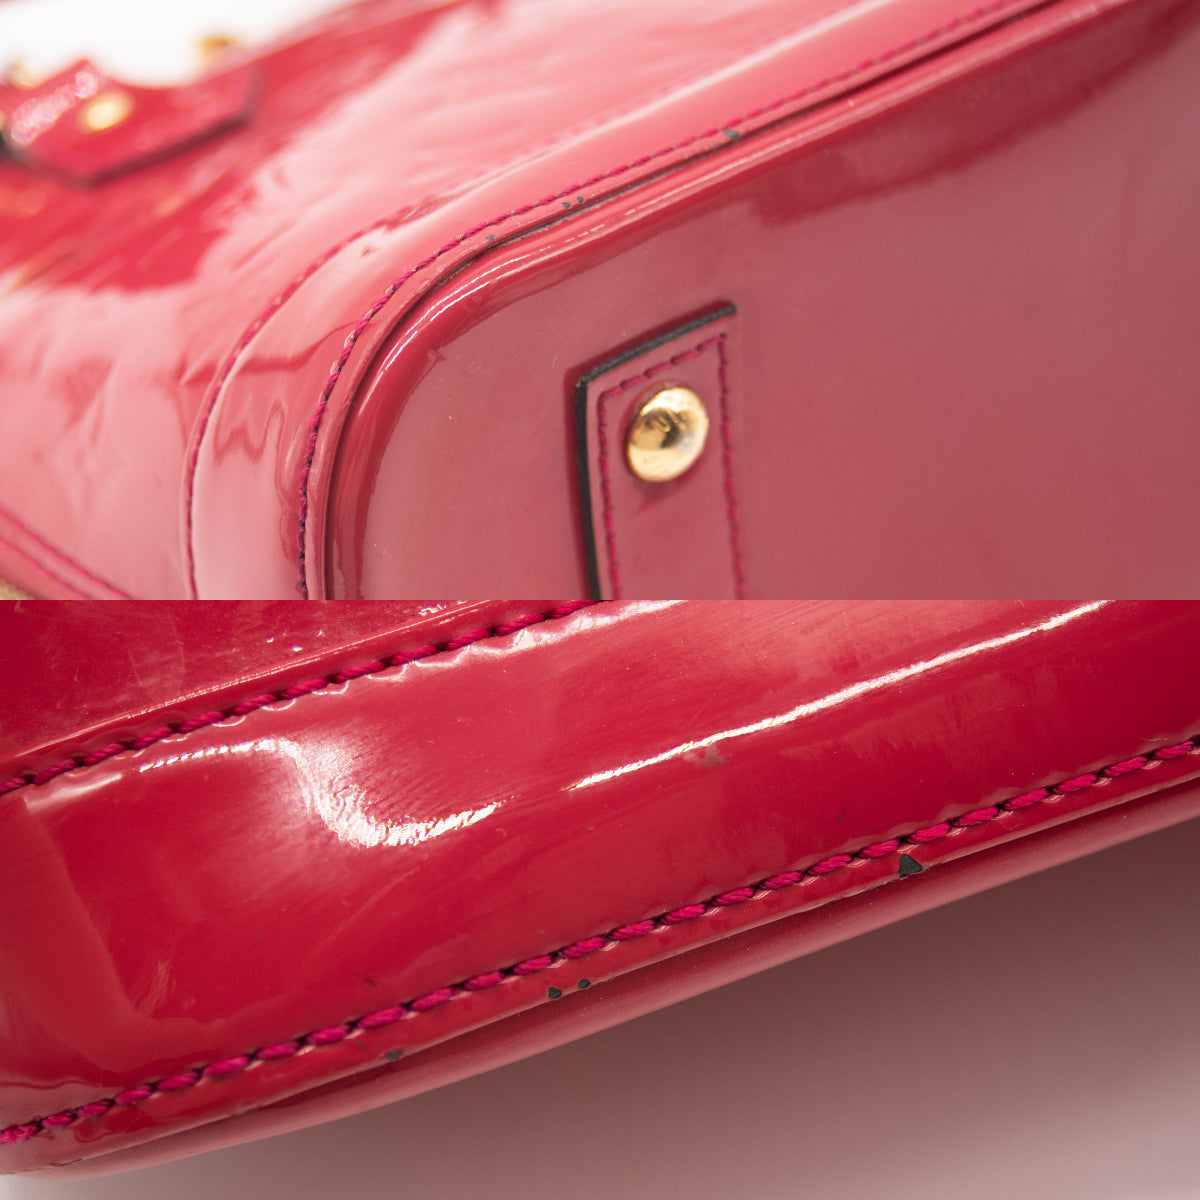 red patent leather louis vuitton